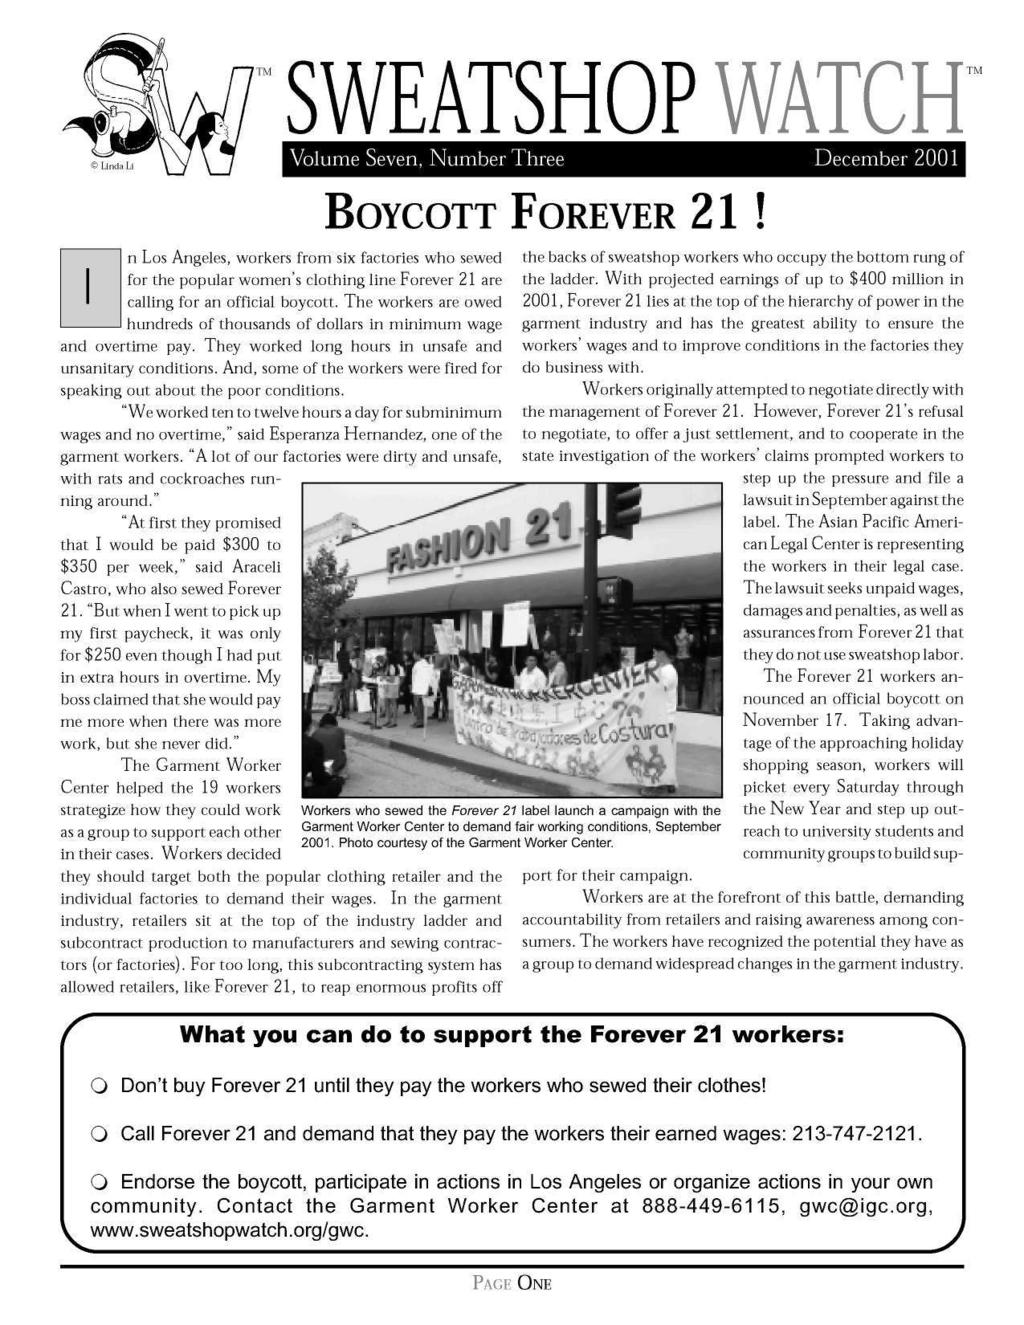 TM SWEATSHOP WATCH Volume Seven, Number Three December 2001 TM n Los Angeles, workers from six factories who sewed for the popular women s clothing line Forever 21 are calling for an official boycott.